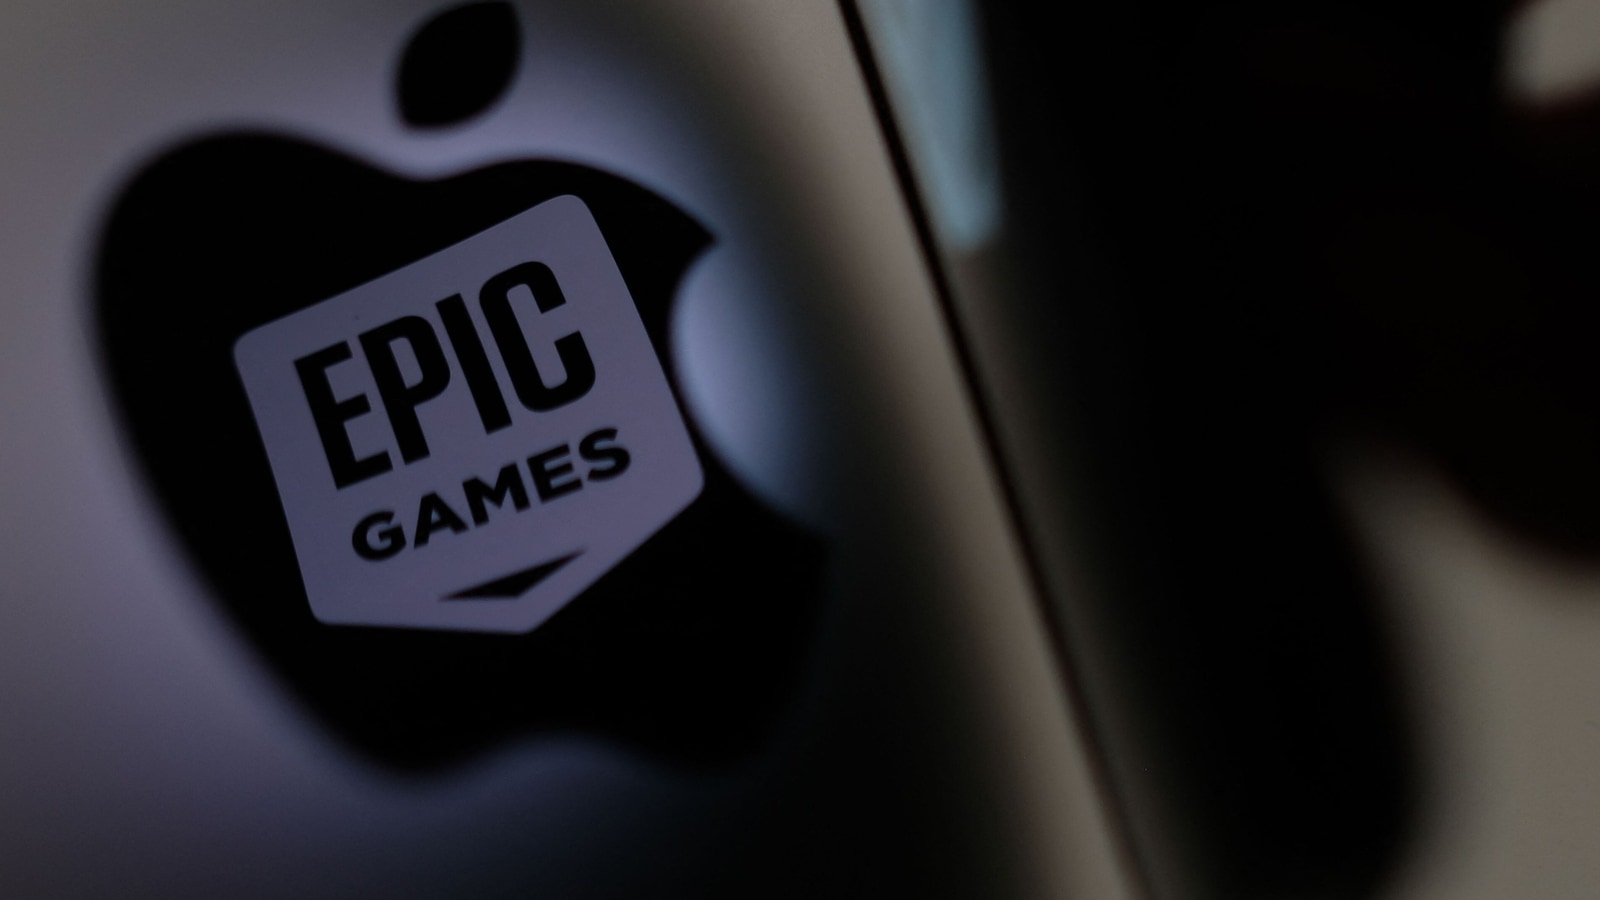 Apple vs Epic Video games lawful combat: Right here is the most popular replace it’s a must to need to know